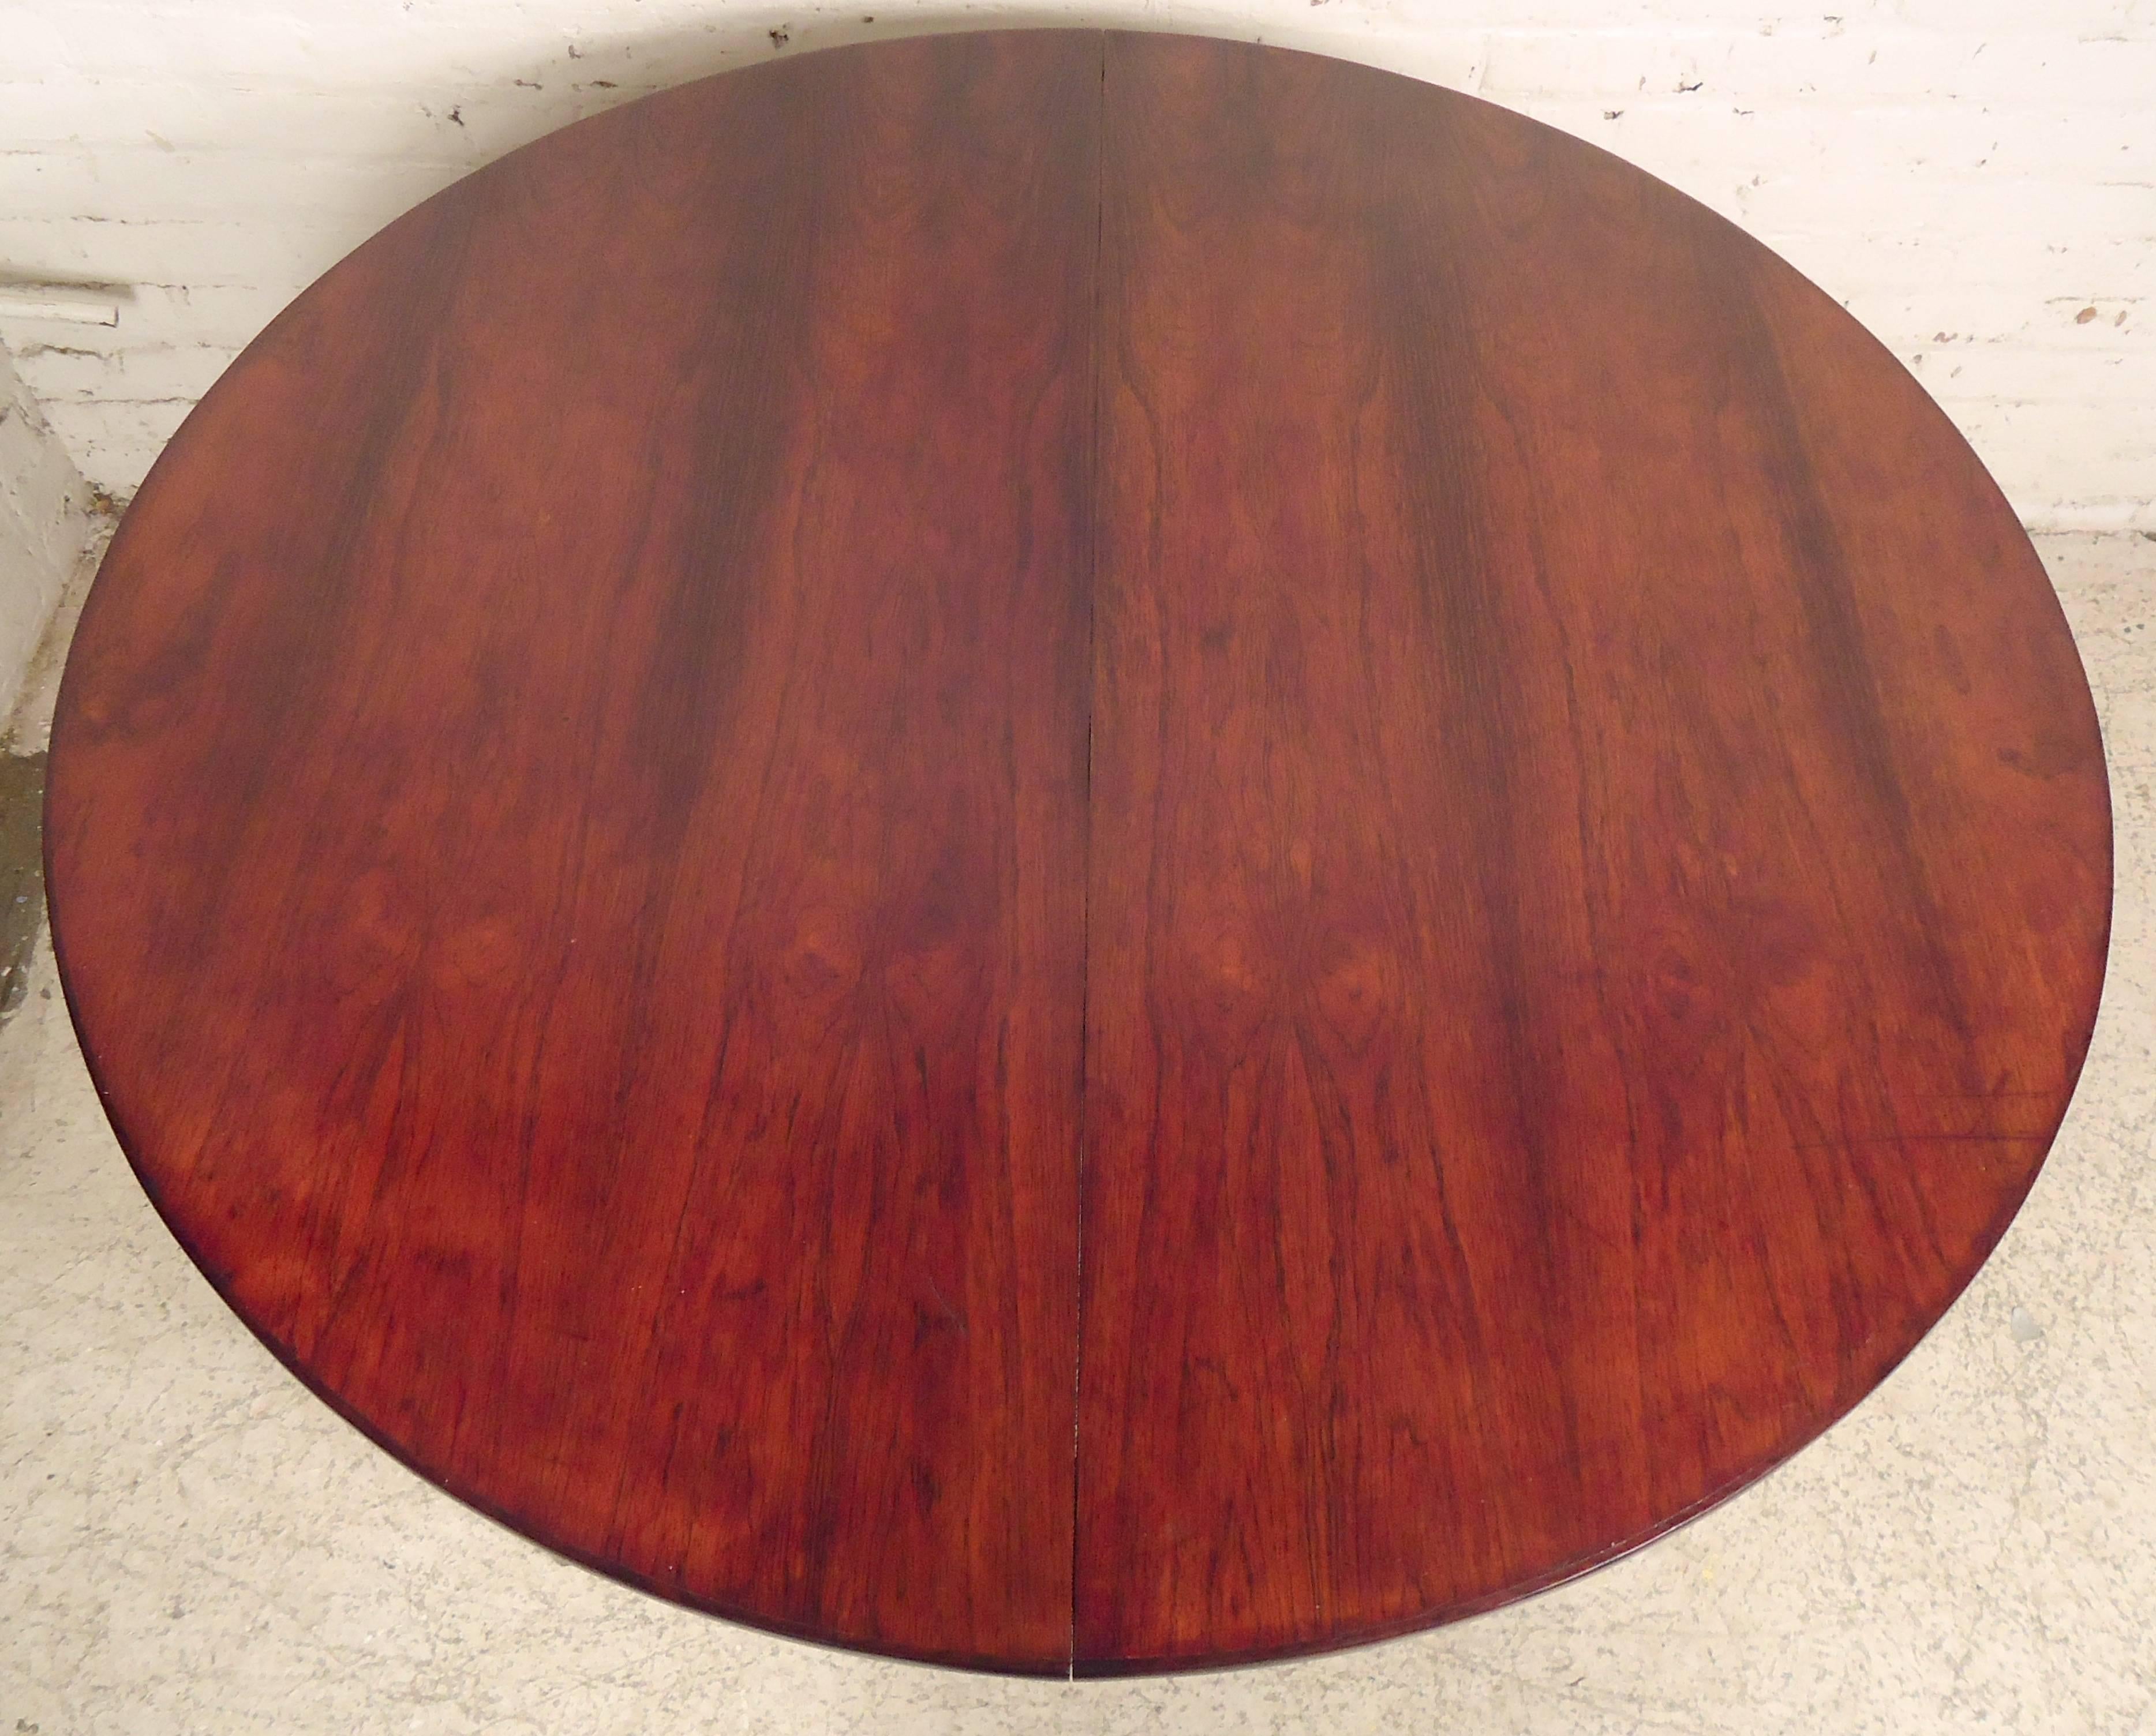 Gorgeous vintage table with great rosewood grain throughout. Table opens up to allow for leaves (30